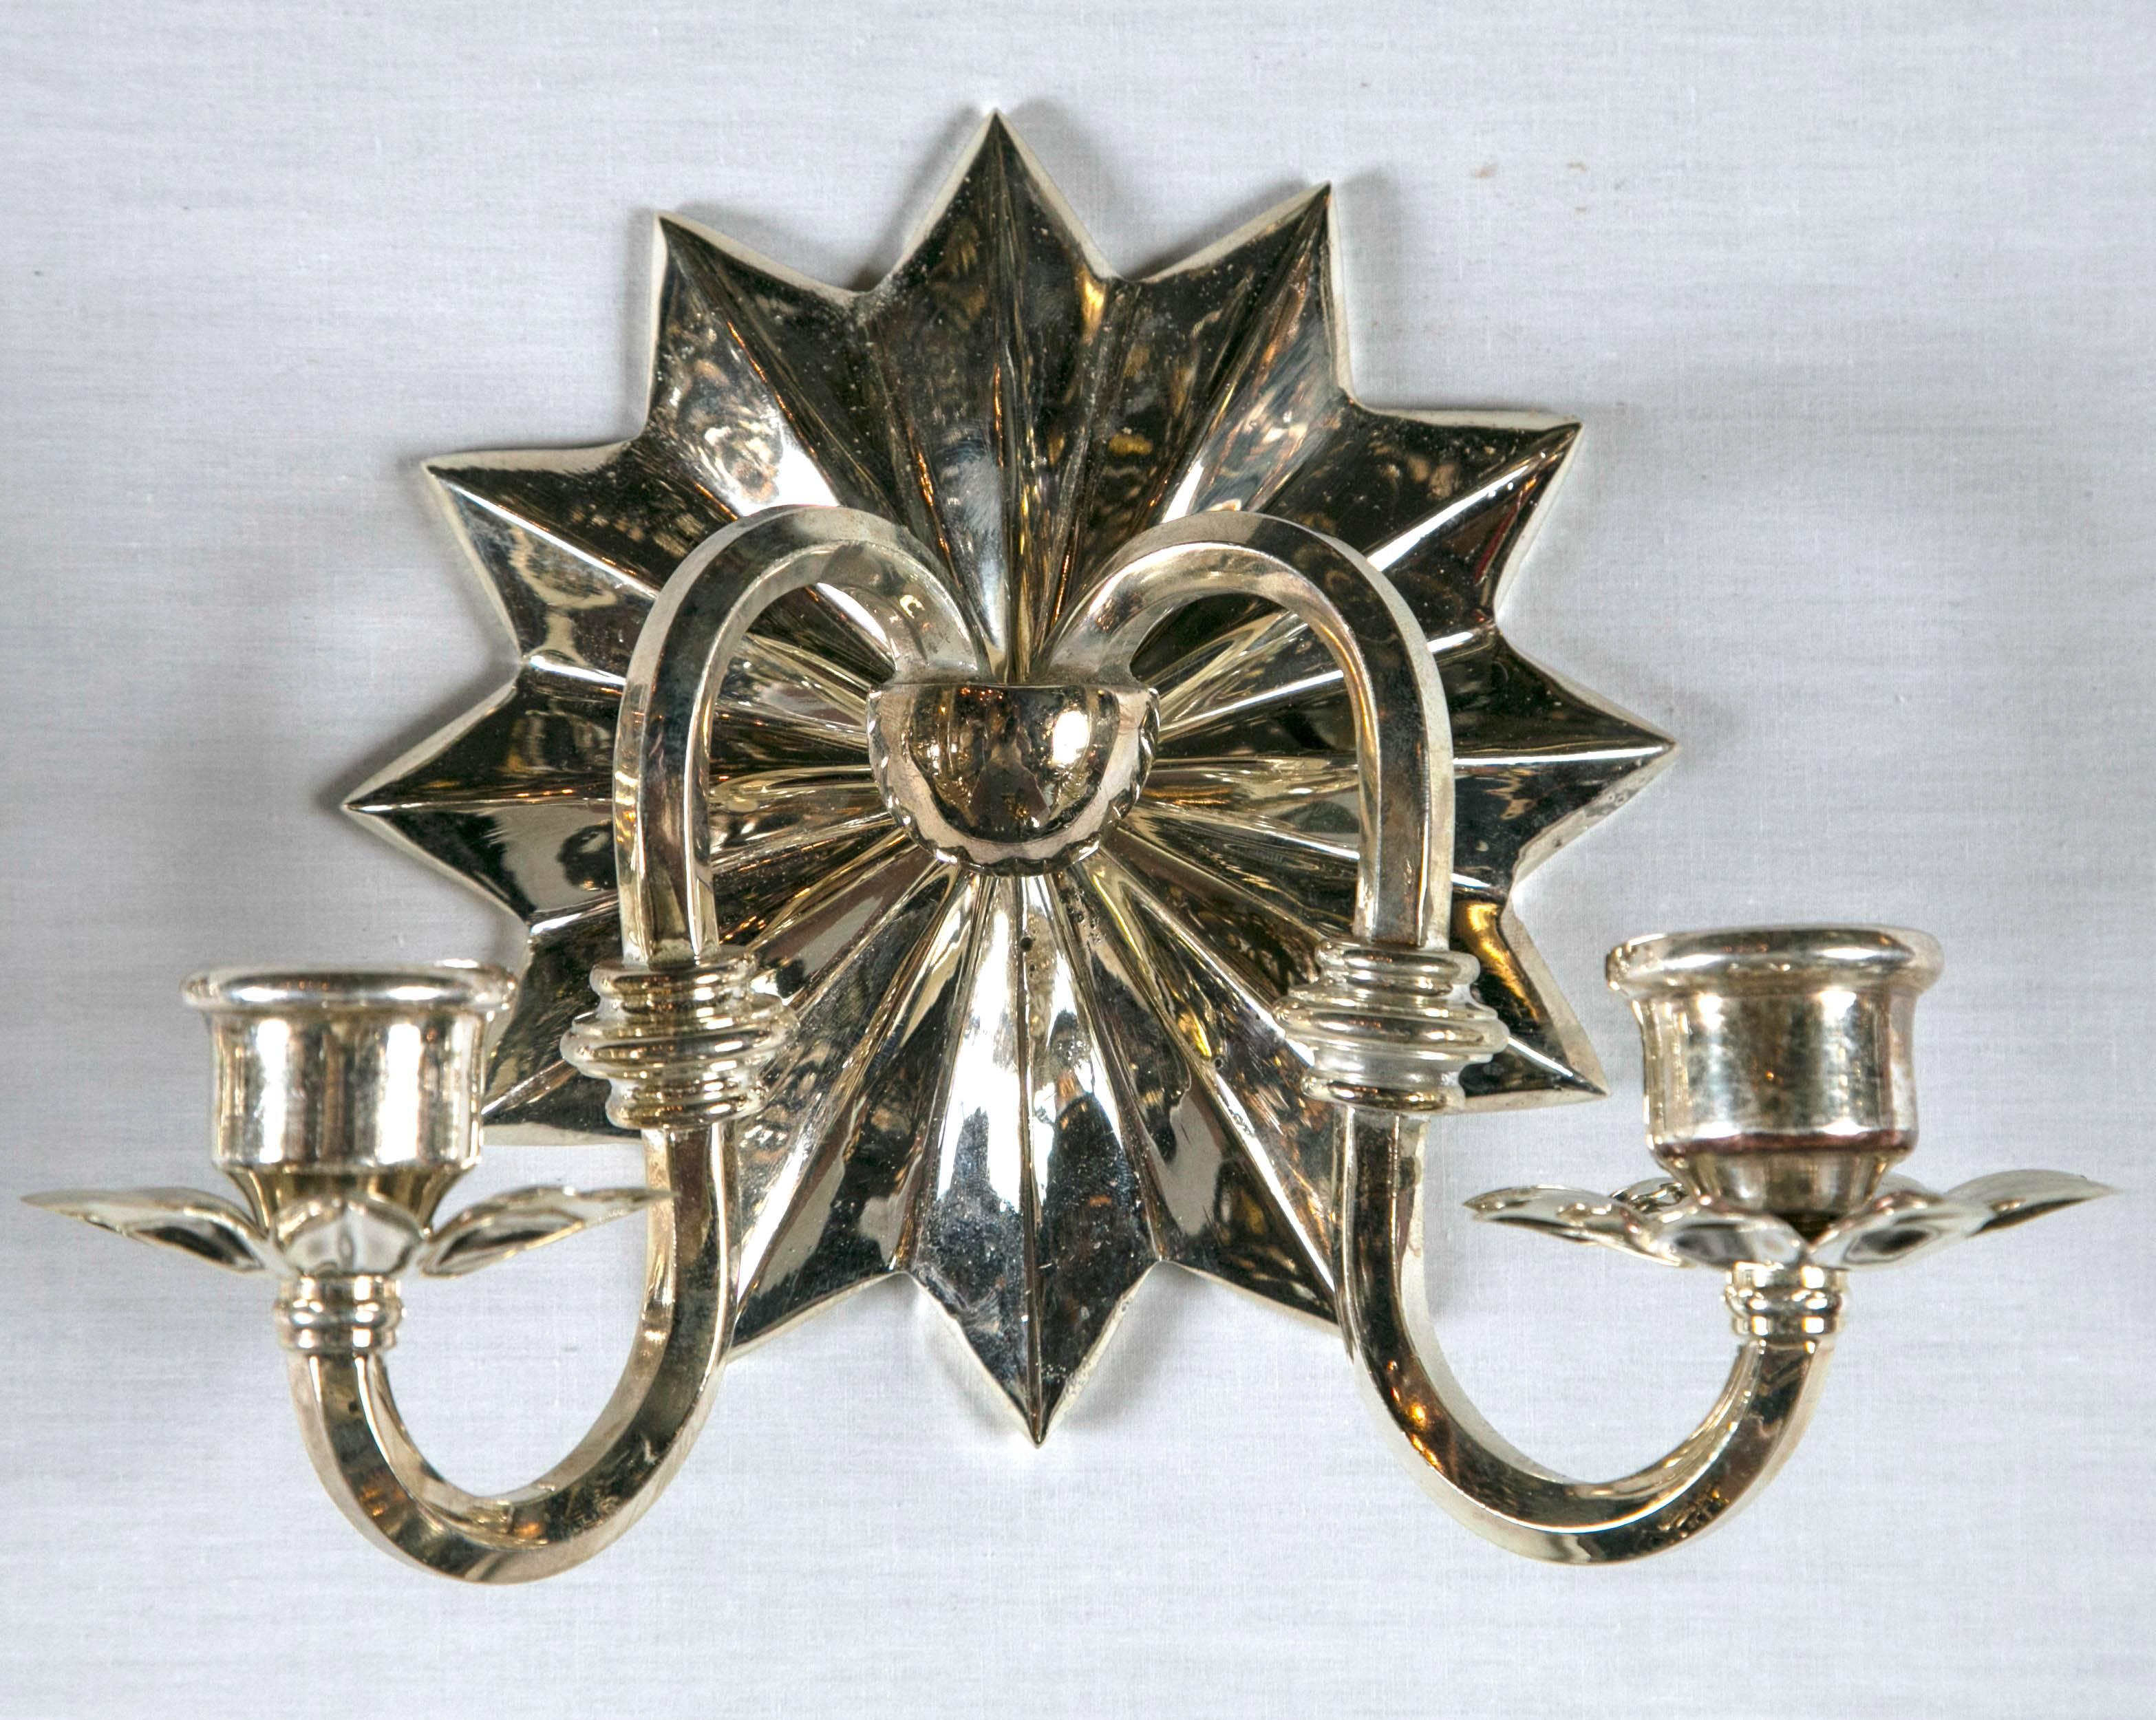 Caldwell silver plated sconces with starburst backplate, circa 1920s set of 12 available, priced per pair.